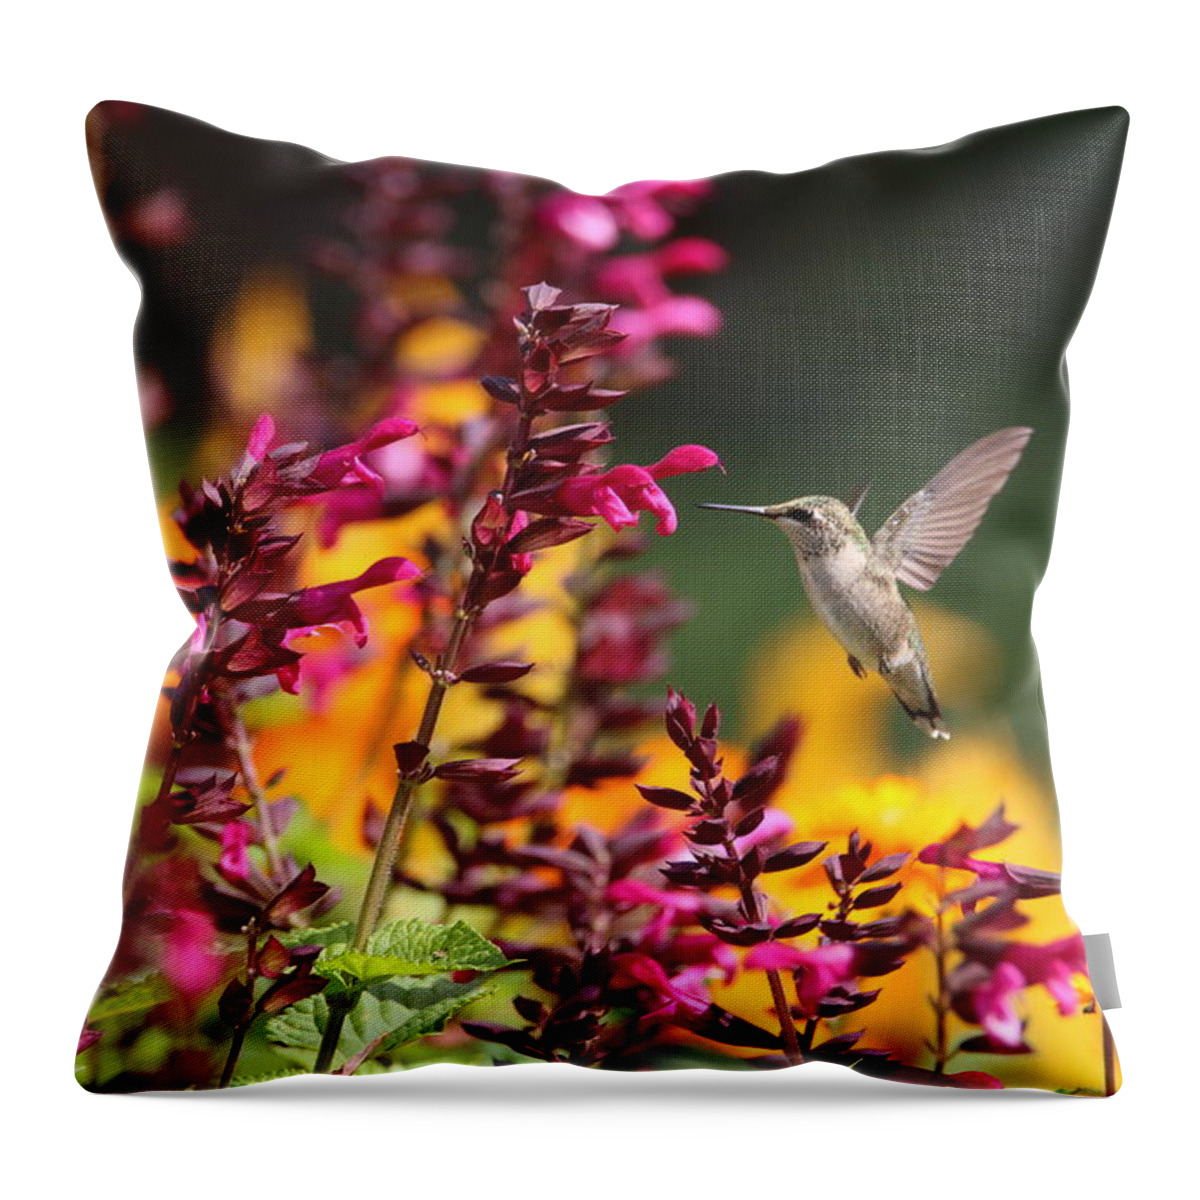 Hummingbird Throw Pillow featuring the photograph Angel In The Garden by Living Color Photography Lorraine Lynch